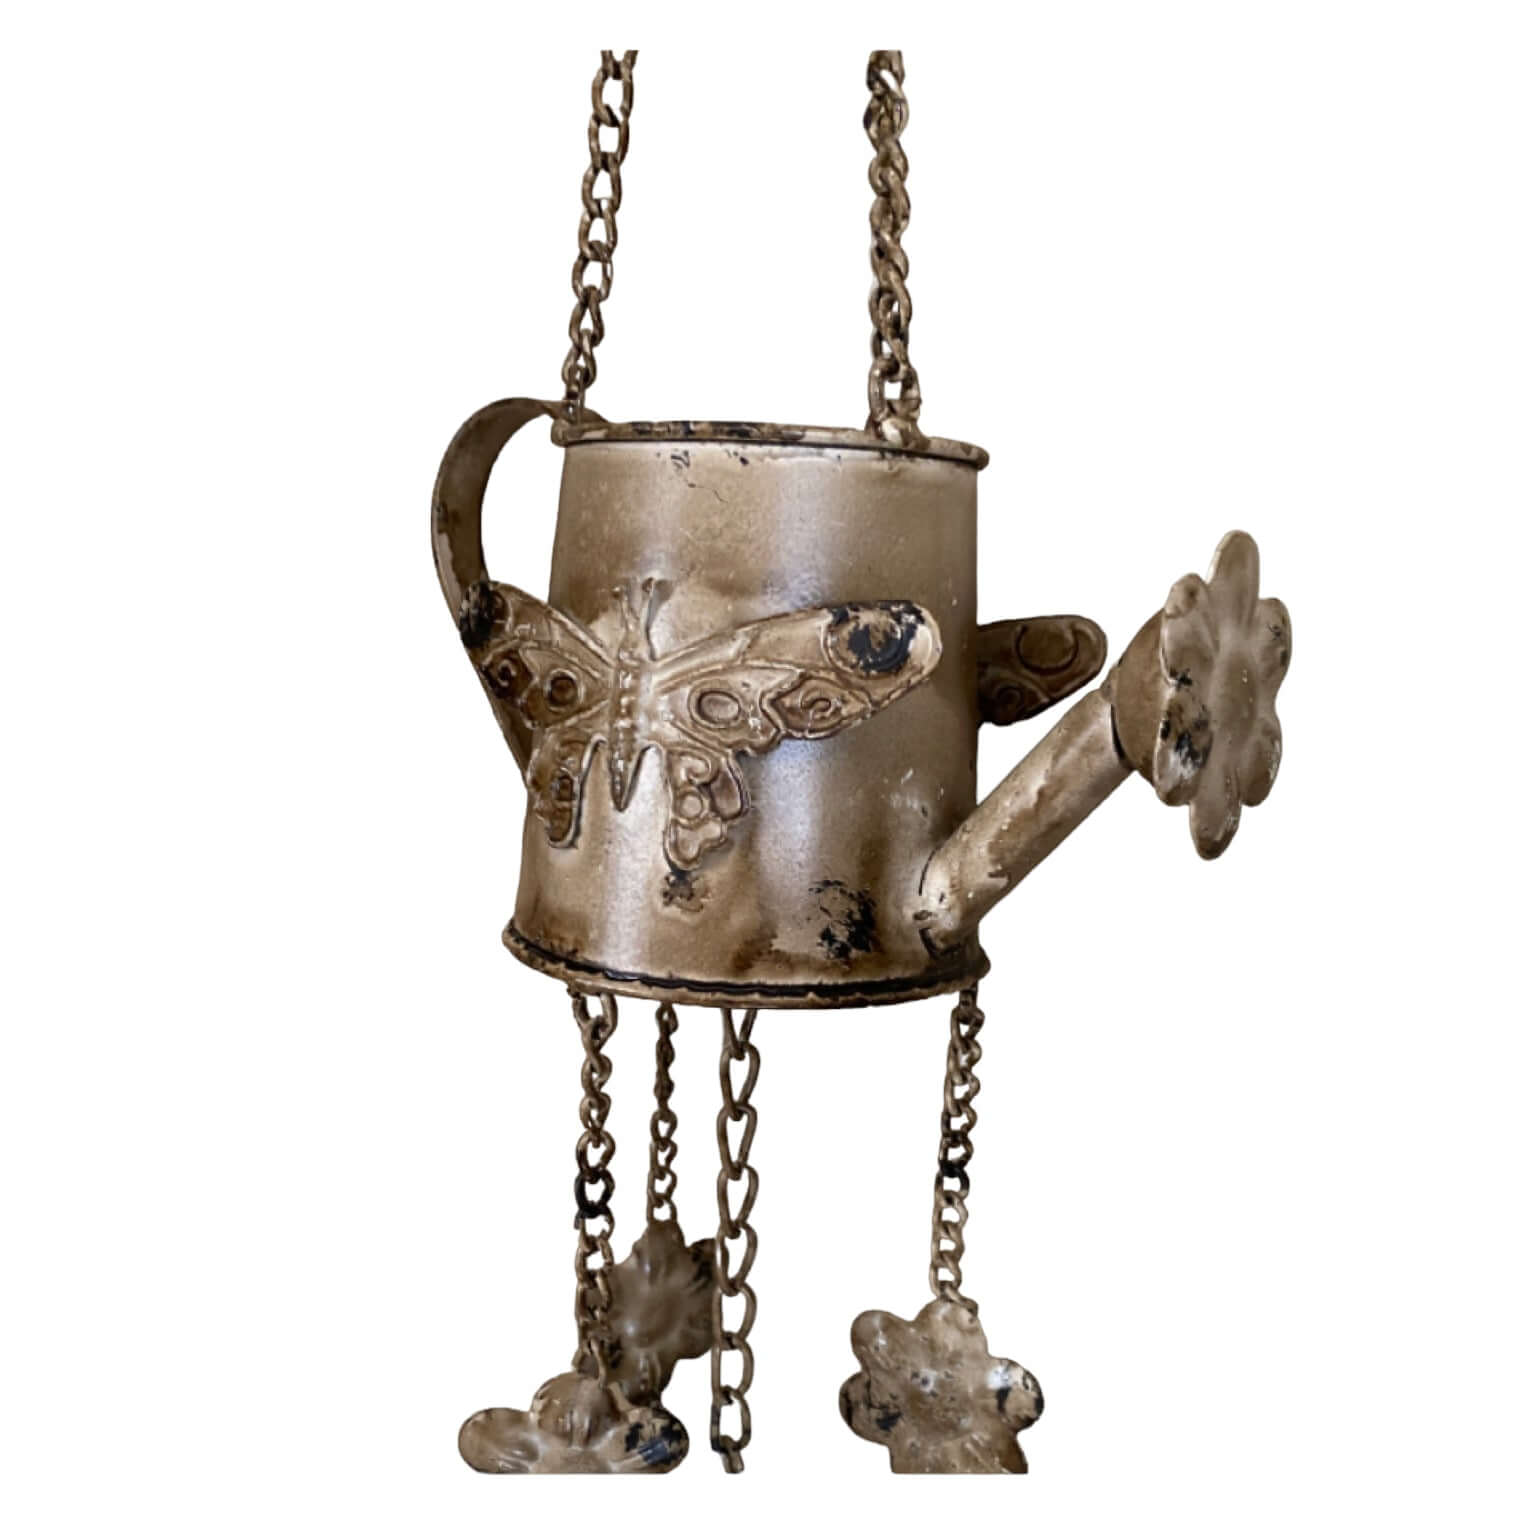 Bell Chime Watering Can Butterfly Garden - The Renmy Store Homewares & Gifts 